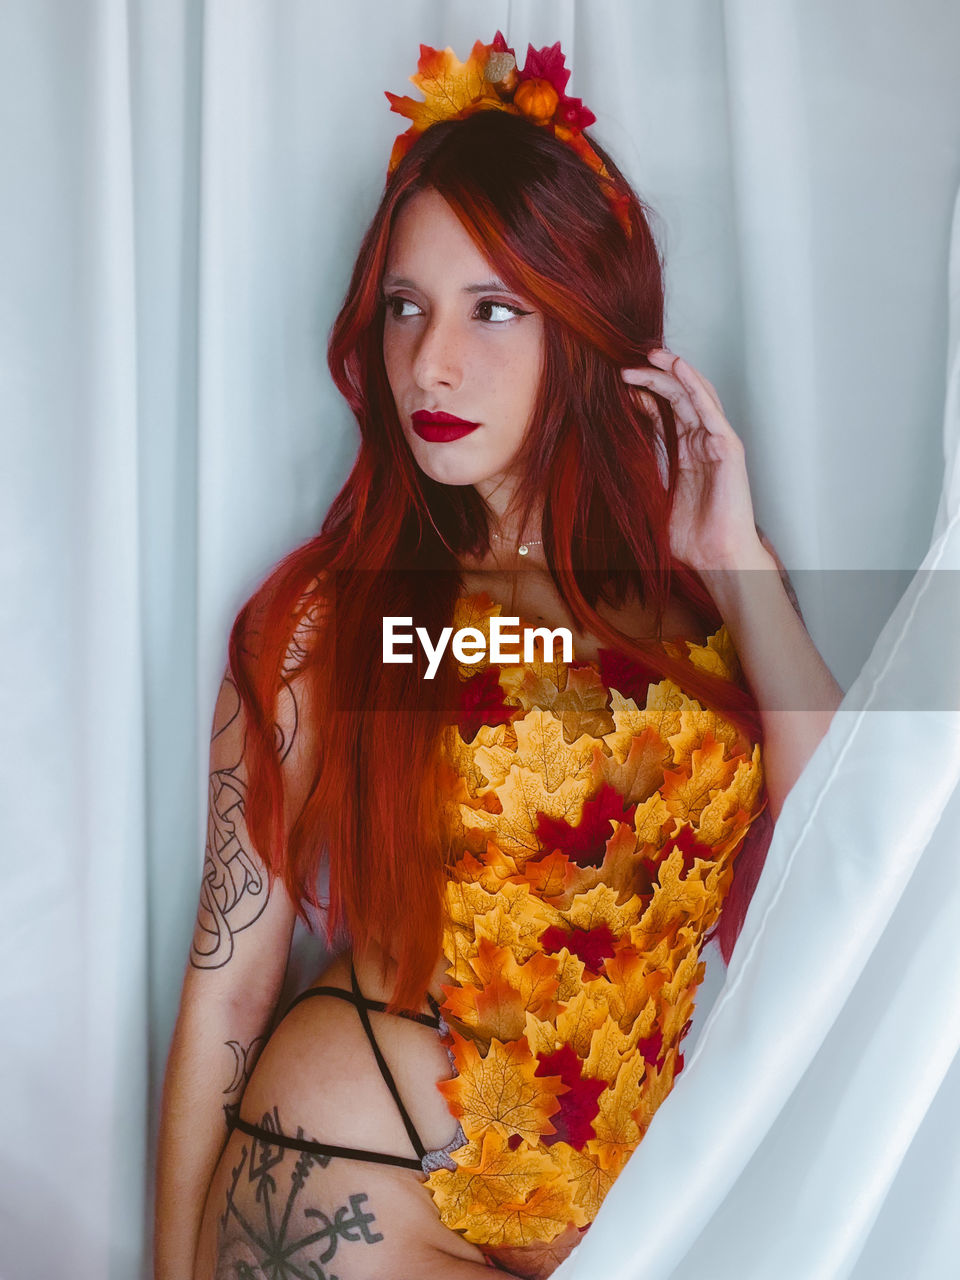 women, redhead, one person, adult, young adult, portrait, fashion, long hair, hairstyle, dyed red hair, clothing, looking at camera, flower, indoors, dress, costume, wedding dress, bride, lifestyles, flowering plant, orange, red, female, elegance, beauty in nature, person, yellow, waist up, nature, looking, emotion, photo shoot, smiling